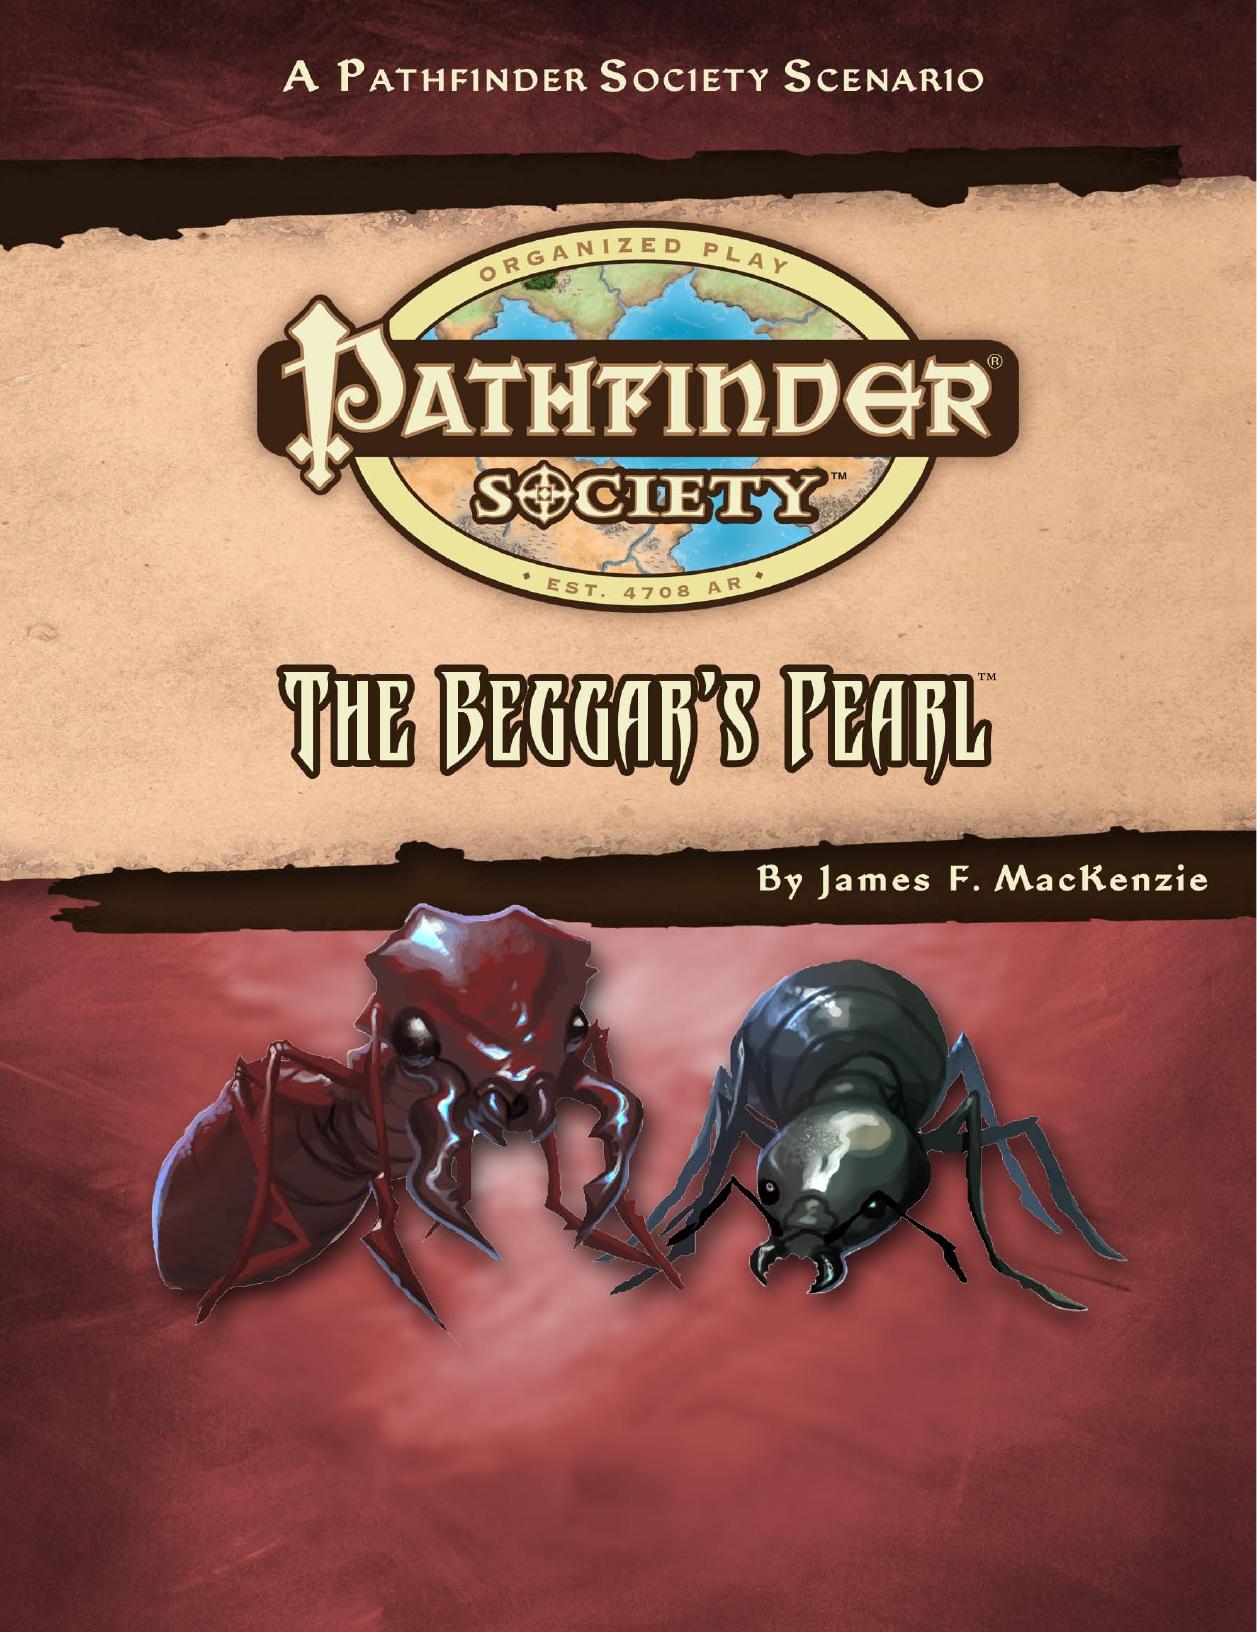 Pathfinder Society: The Beggar's Pearl